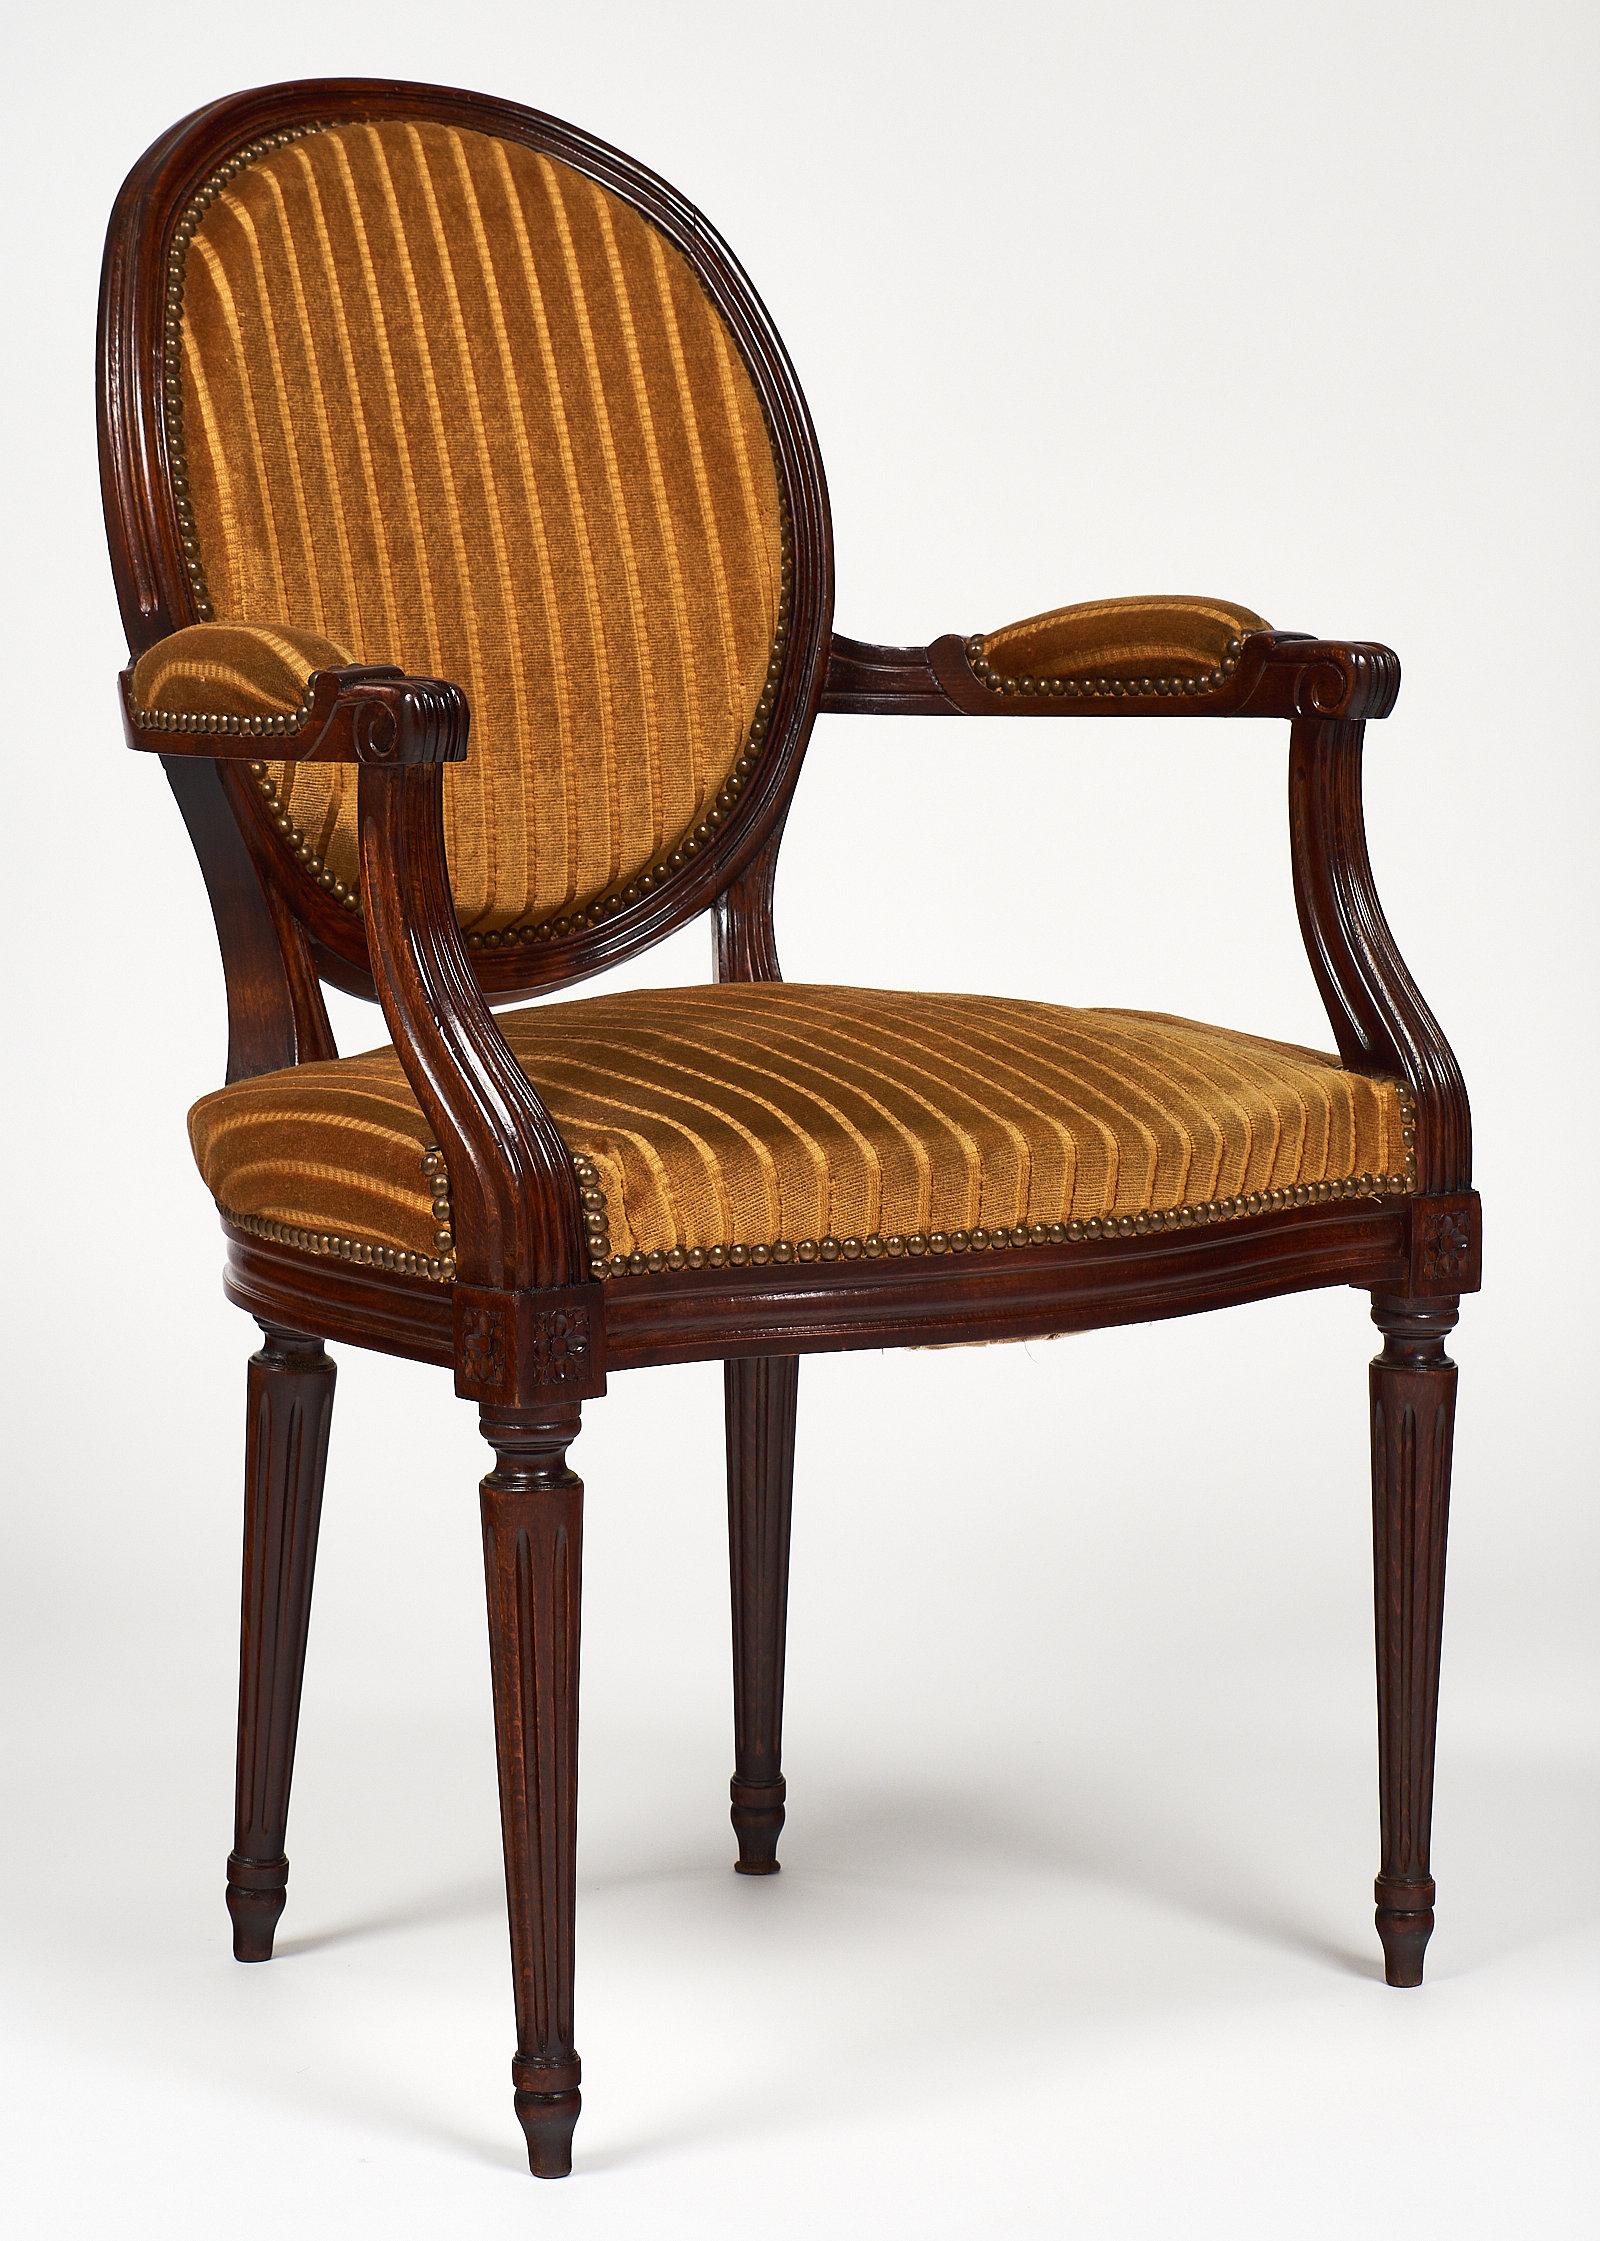 Louis XVI style walnut armchair with tapered legs and medallion back. We love the hand-carved details throughout. The original stamped velvet upholstery is in decent condition, with decorative brass nailheads.